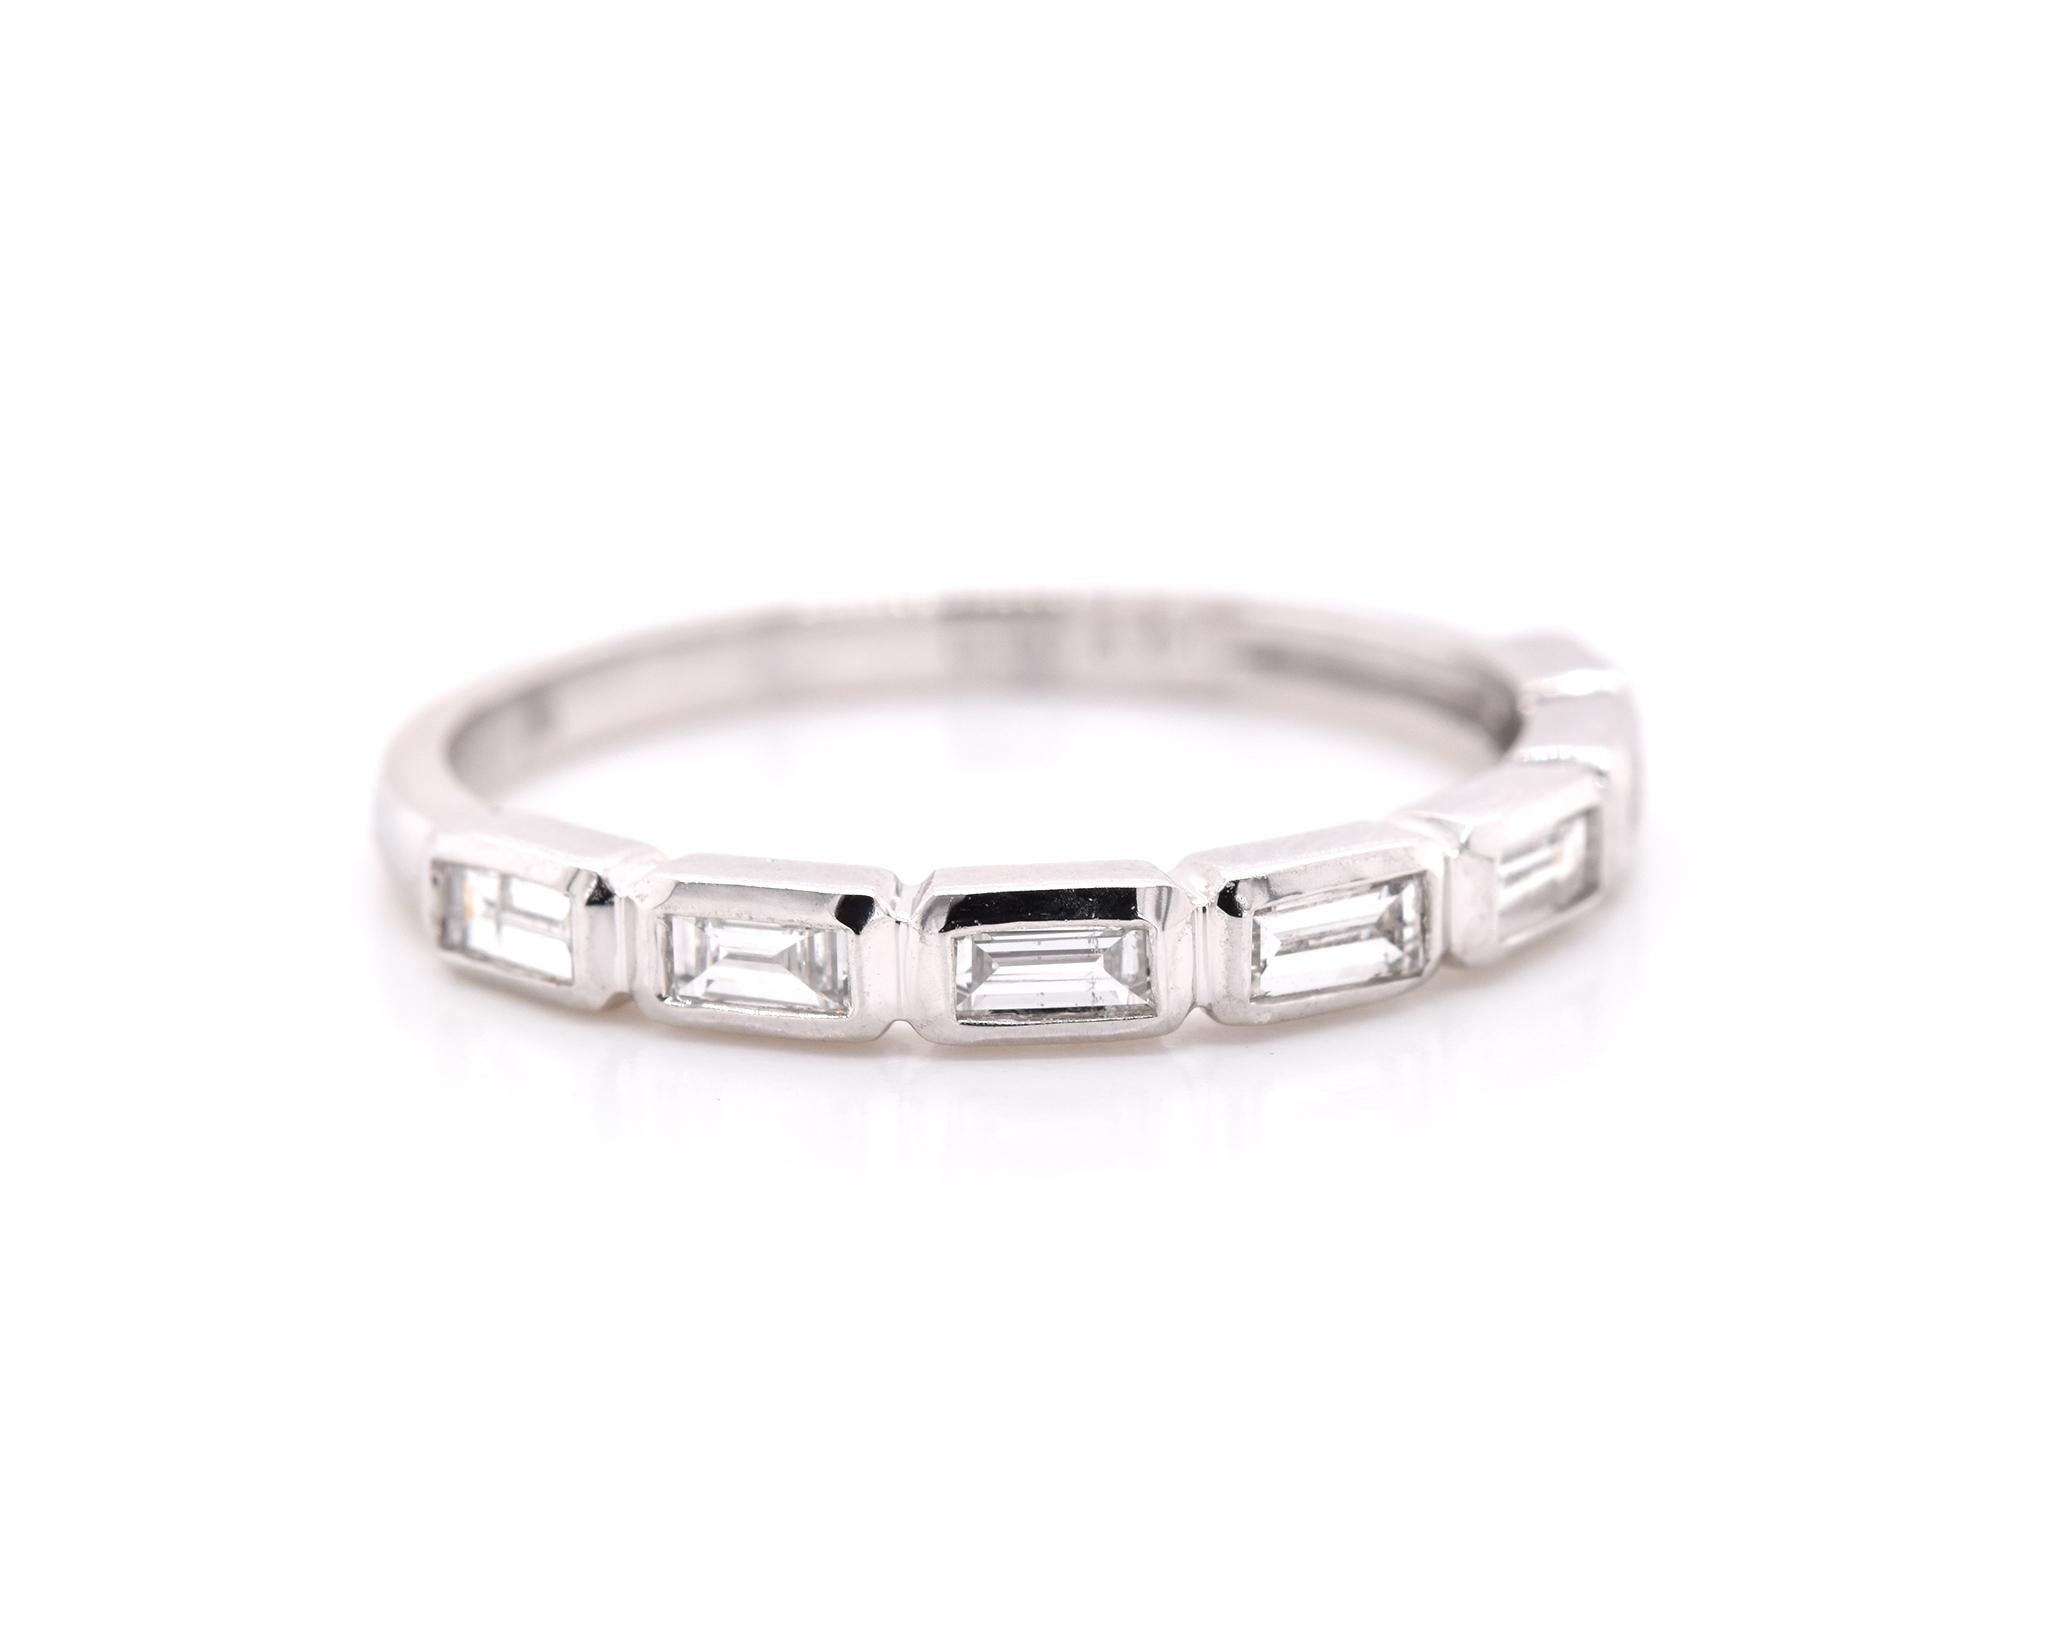 Designer: Watchlink
Material: 14k white gold
Diamonds: 7 round baguette cuts = 0.29cttw
Color: G
Clarity: VS
Size: 6 ¾ (please allow two additional shipping days for sizing requests)  
Dimensions: ring measures 2.50mm in width
Weight: 1.7 grams
